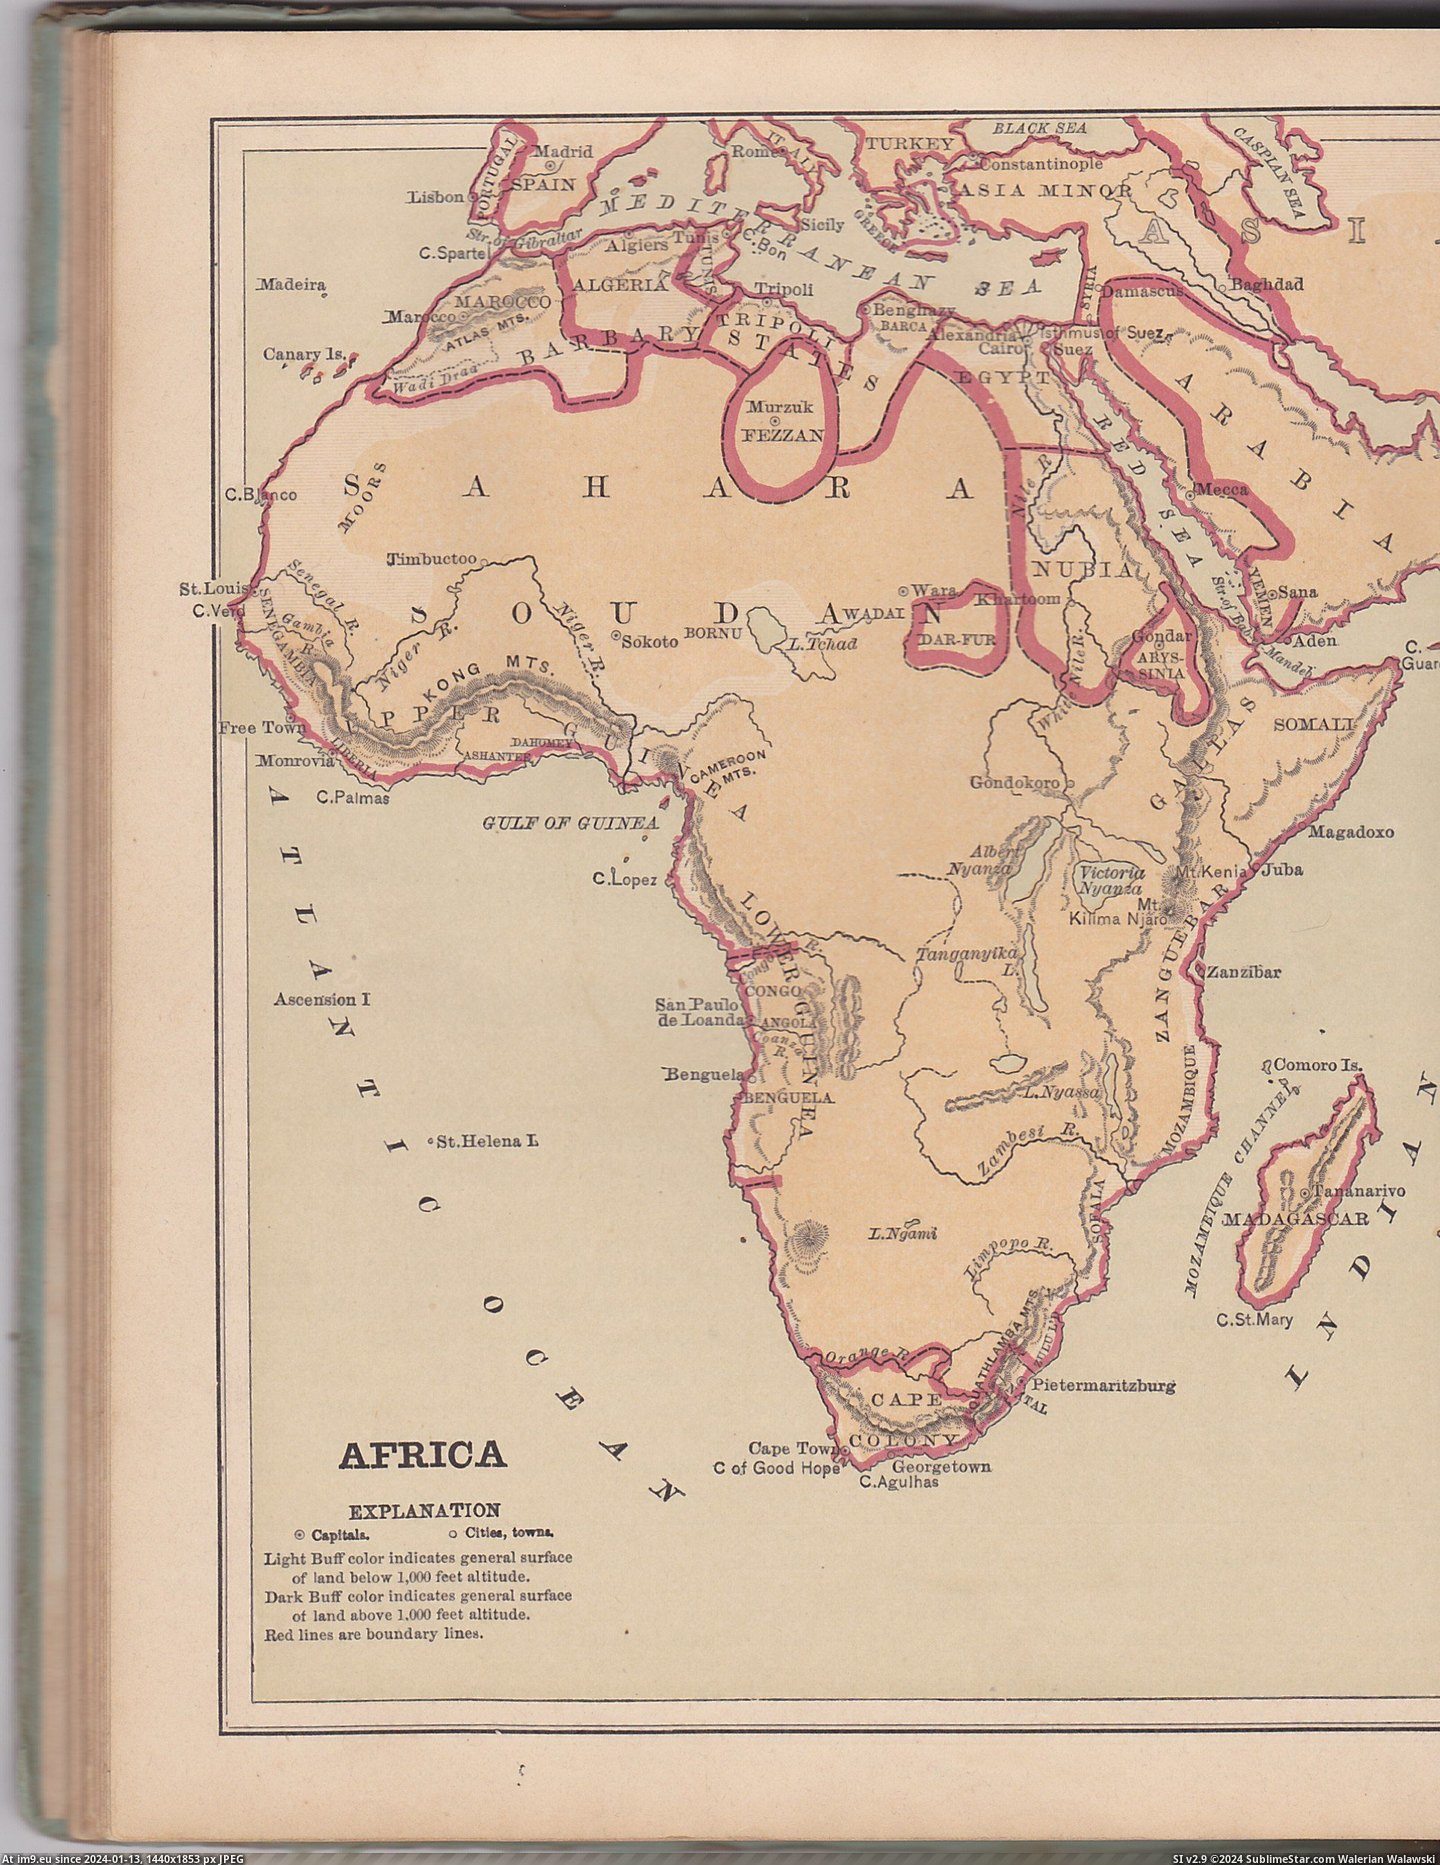 #Africa #Pre #Colonial #Guyot #Elementary #Geography [Mapporn] Pre-Colonial Africa in 1875, From 'Guyot's Elementary Geography' [OC][2080x2668] Pic. (Image of album My r/MAPS favs))